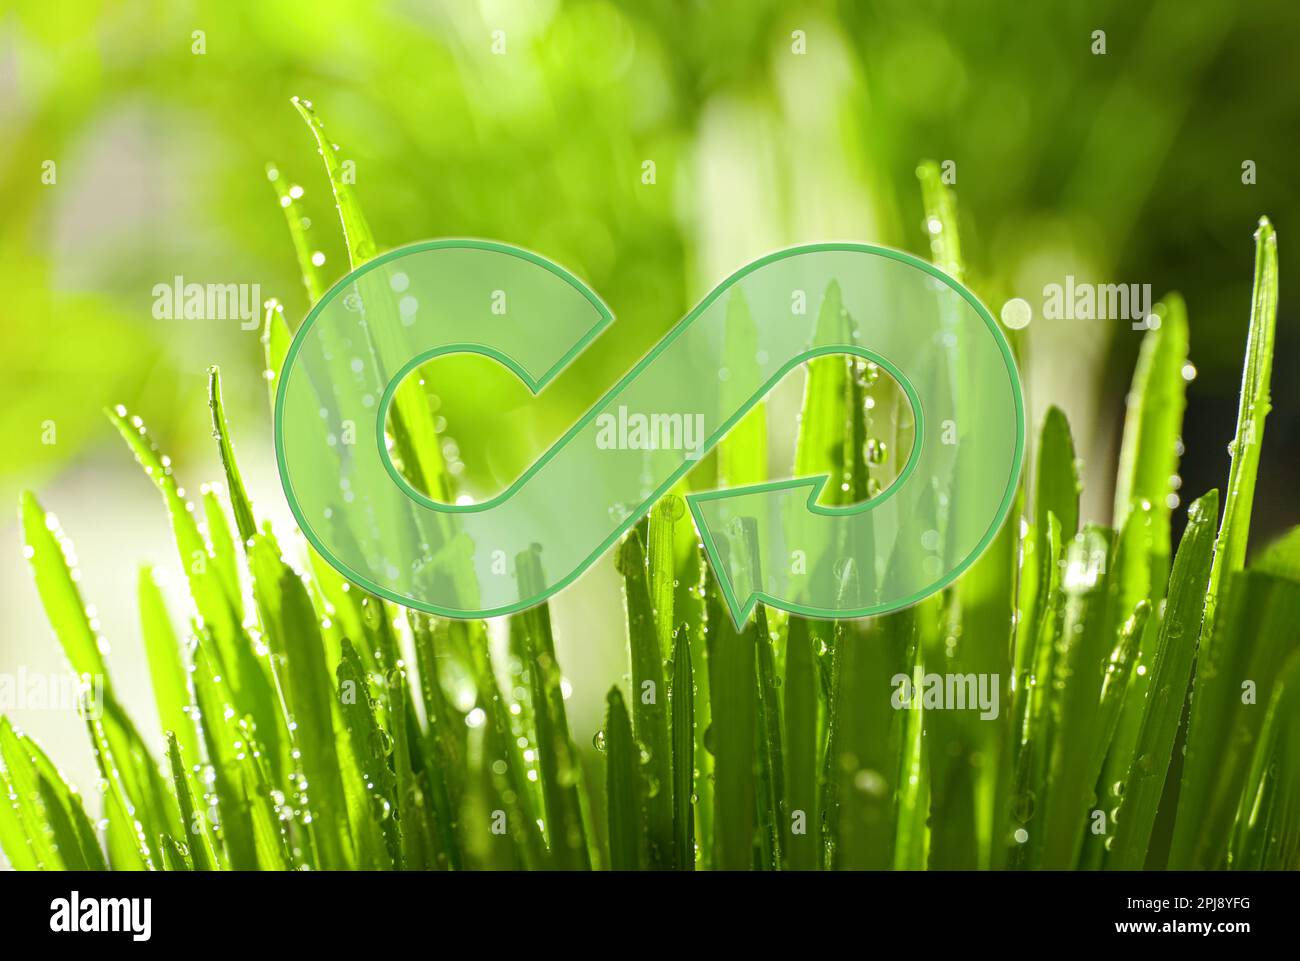 Circular economy concept. Green grass with dew and illustration of infinity symbol Stock Photo